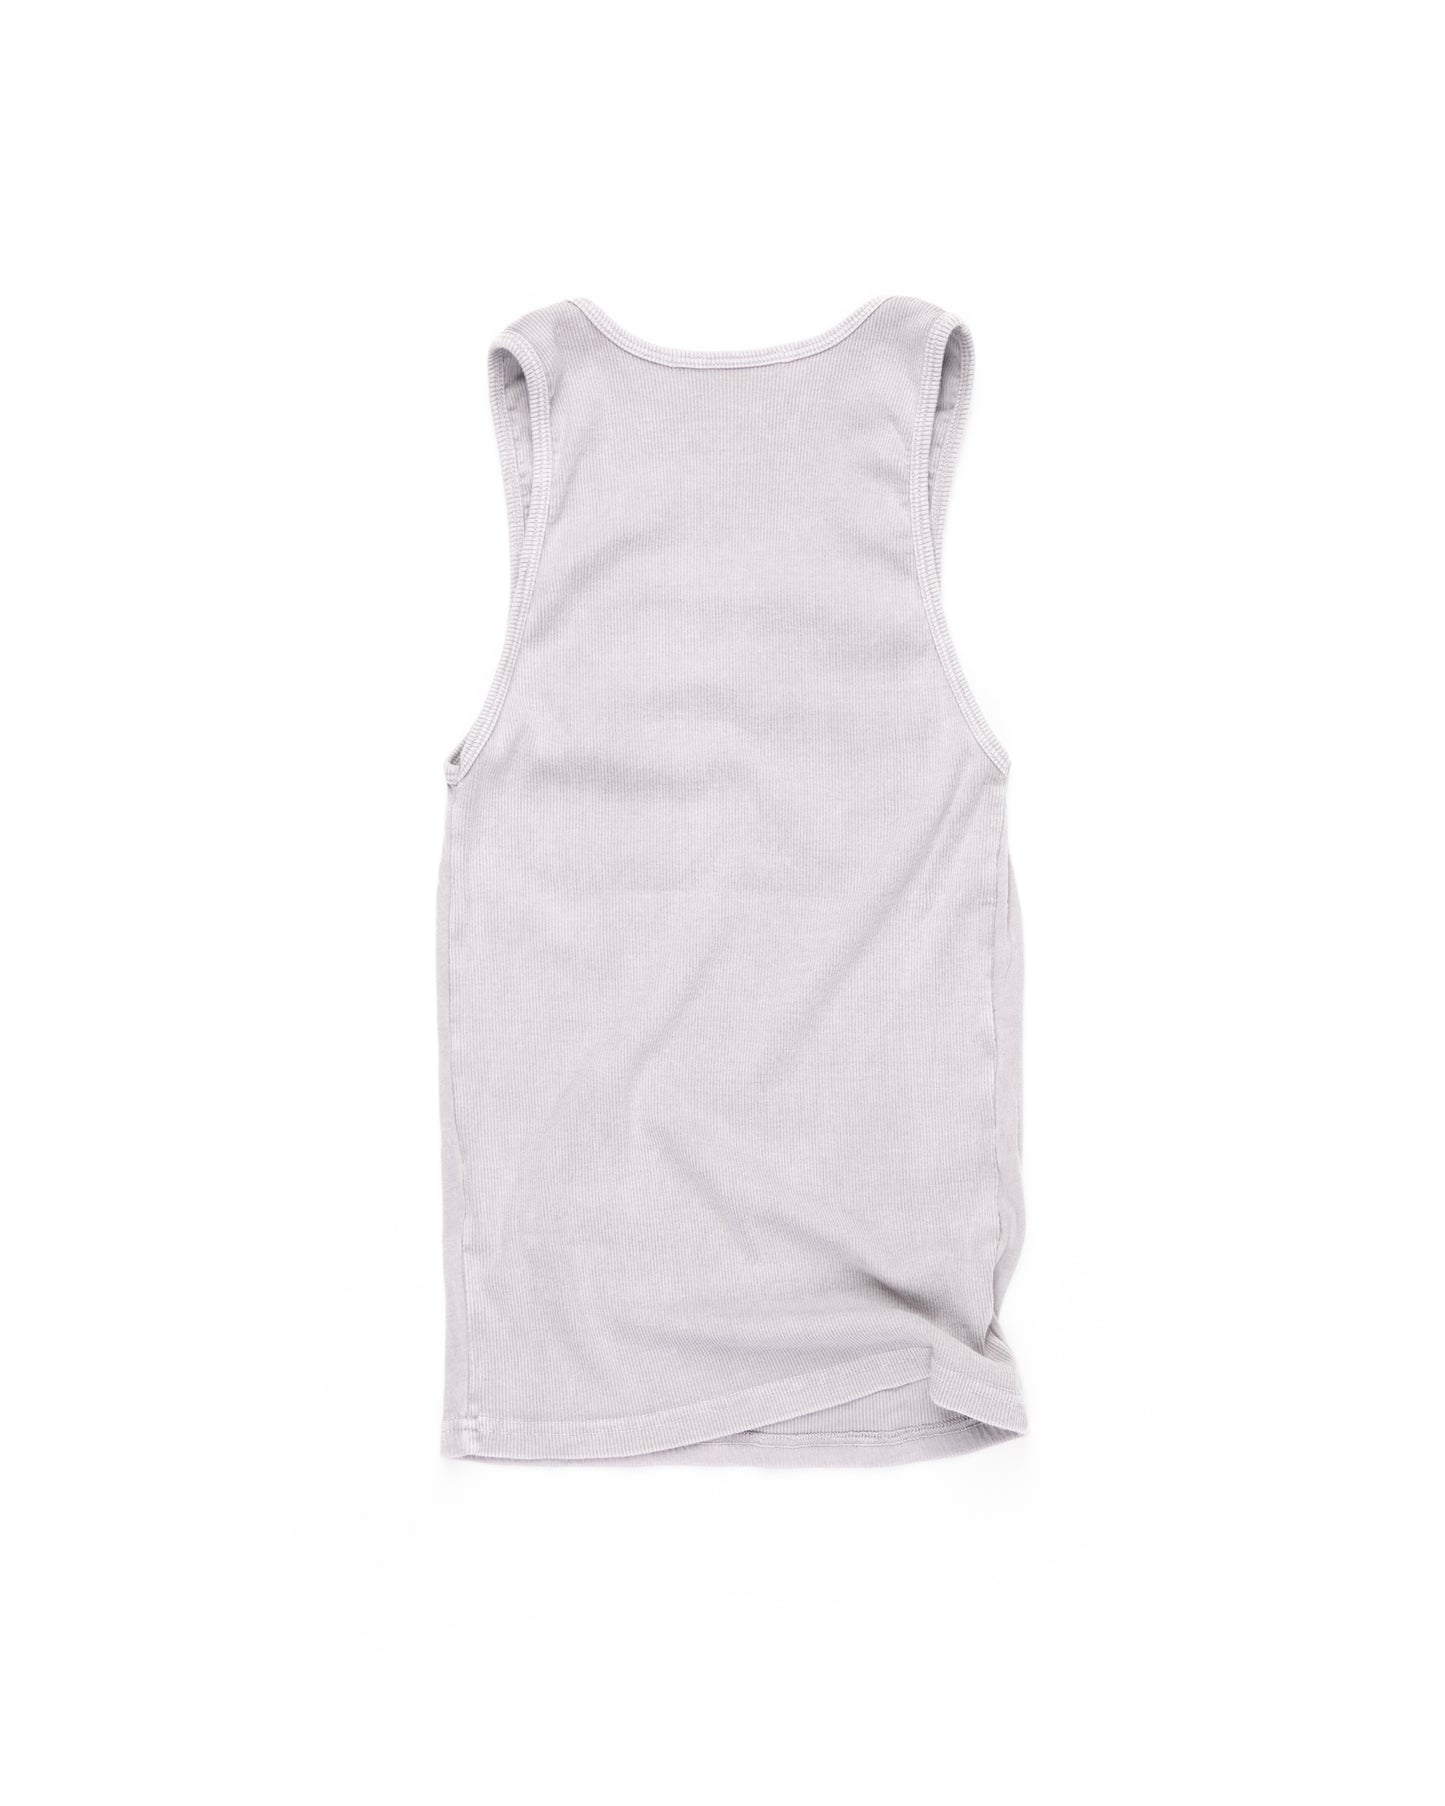 Double Layer Tank Top: Oil